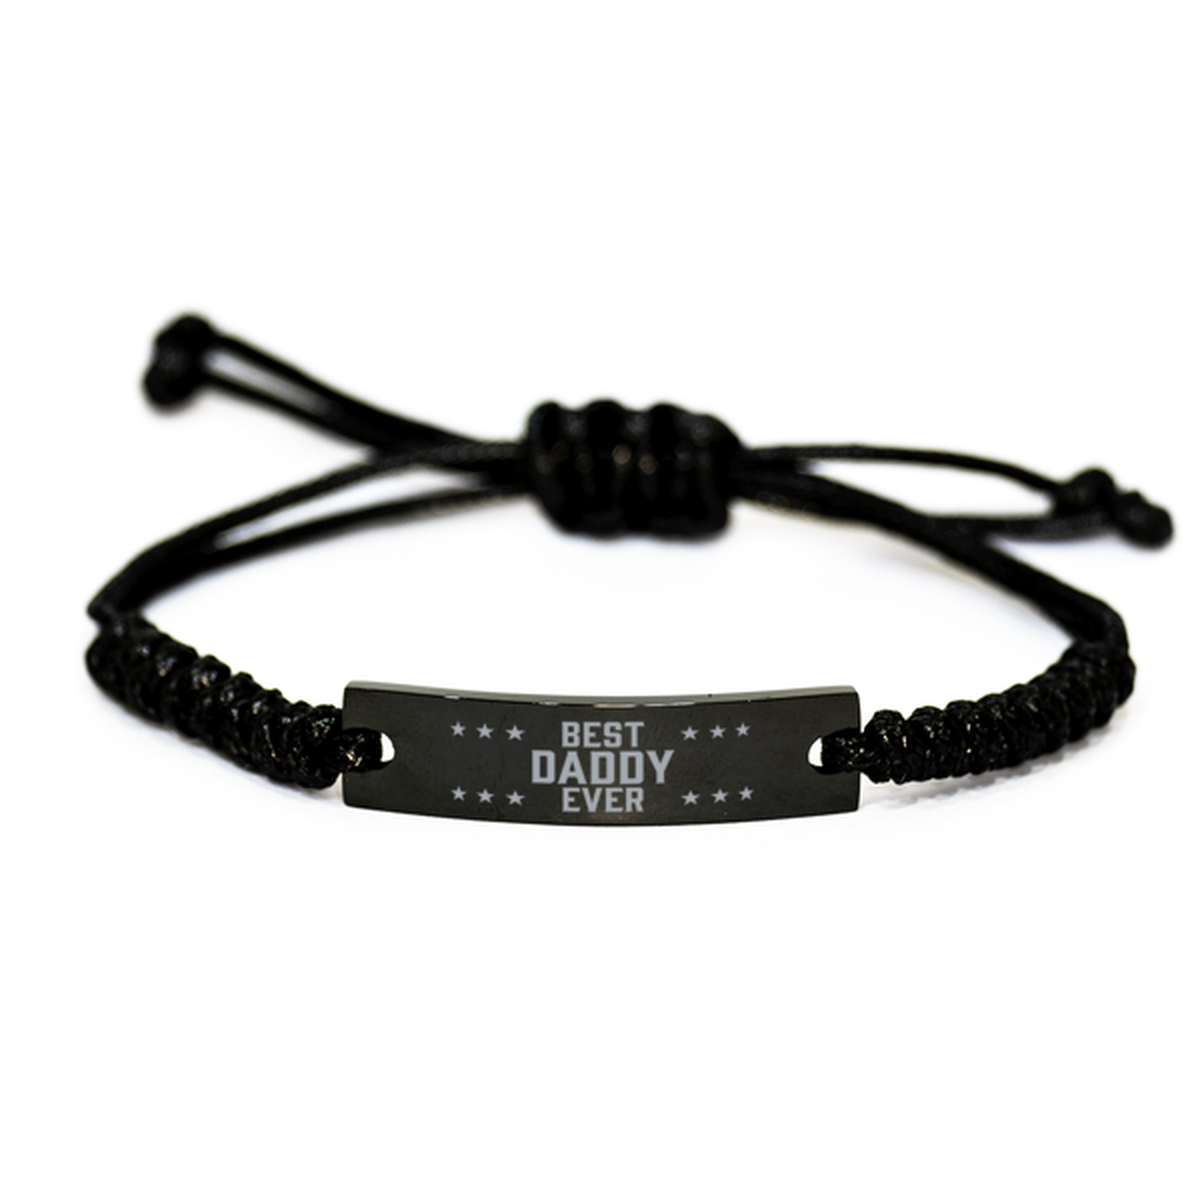 Best Daddy Ever Daddy Gifts, Funny Engraved Rope Bracelet For Daddy, Birthday Family Gifts For Men